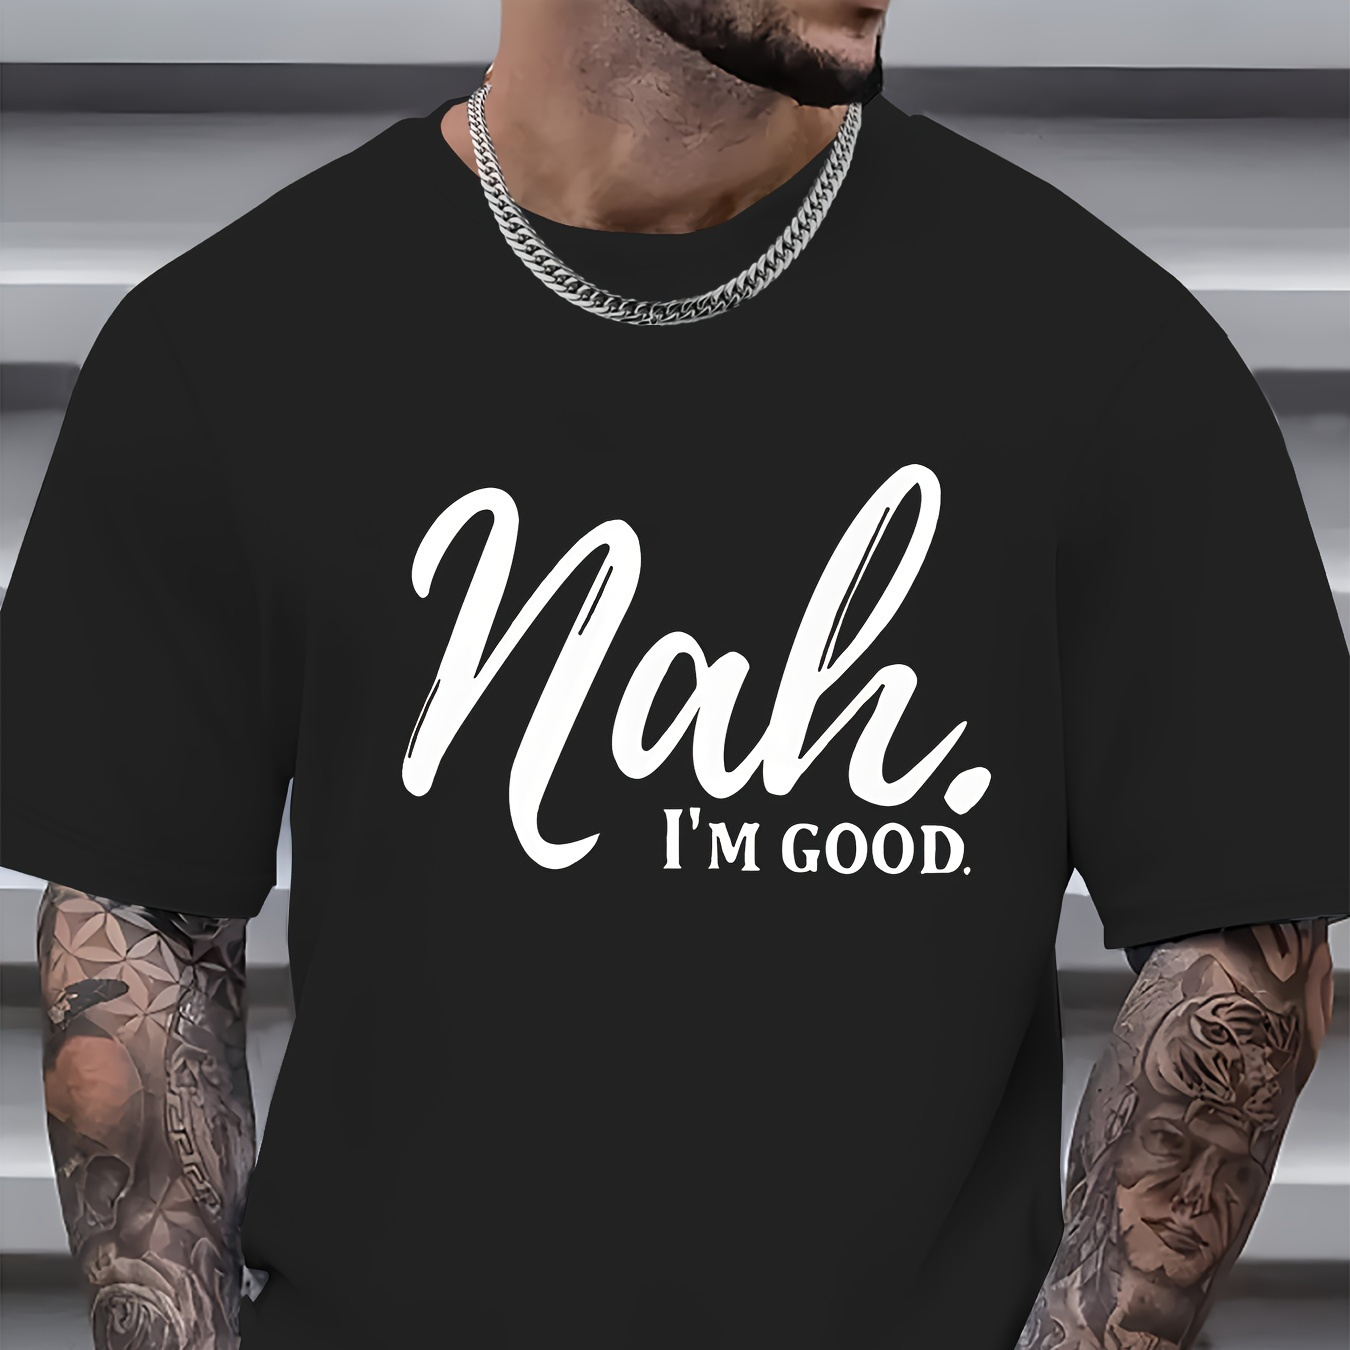 

1 Pc, 100% Cotton T-shirt, Expressive & Versatile 'nah I'm Good' Men's Tee: Quick-dry, Breathable Comfort, All-year Round Casual